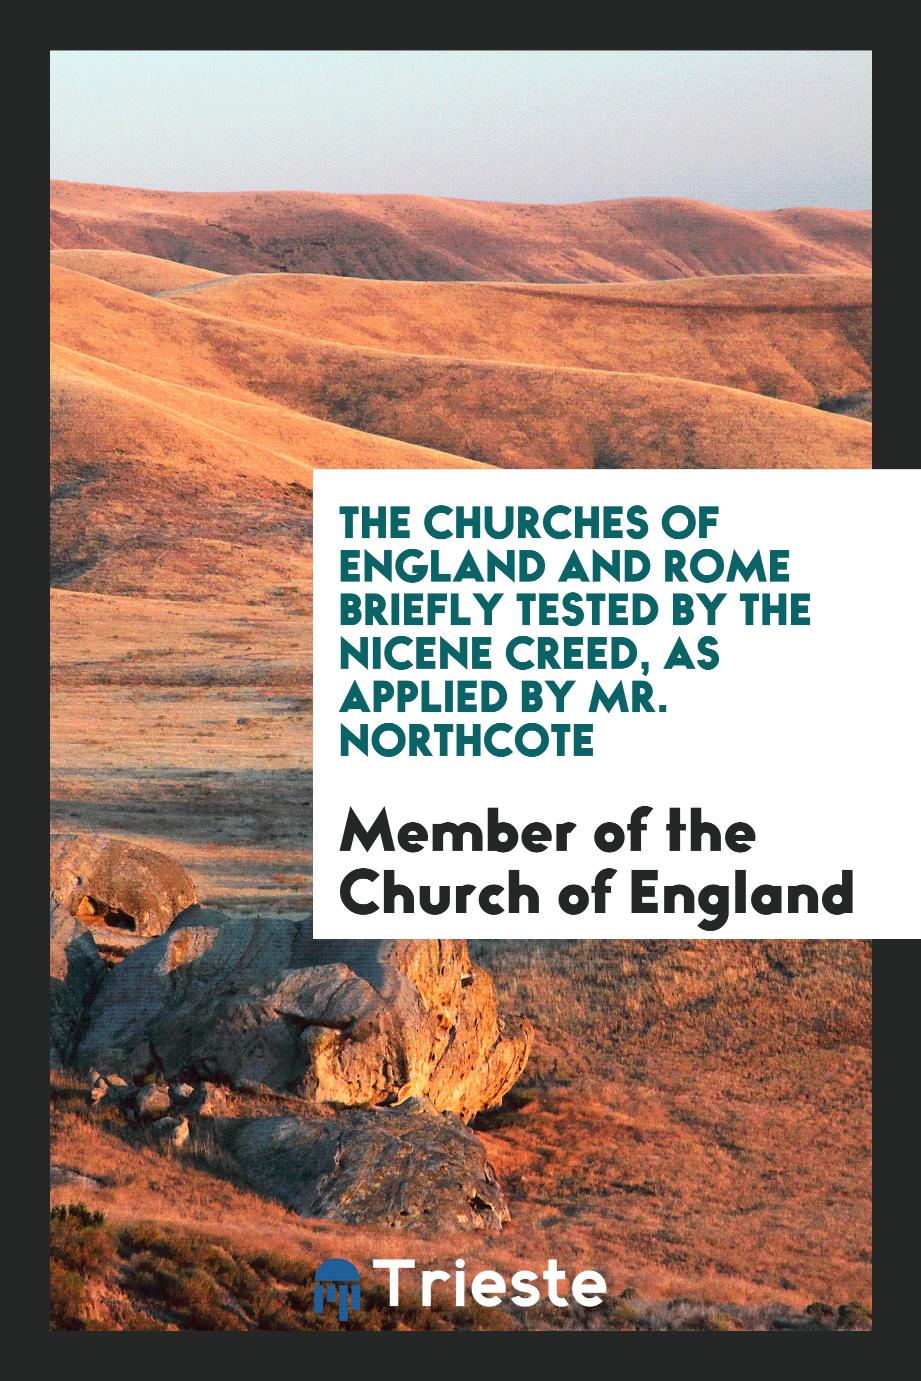 The Churches of England and Rome Briefly Tested by the Nicene Creed, As Applied by Mr. Northcote